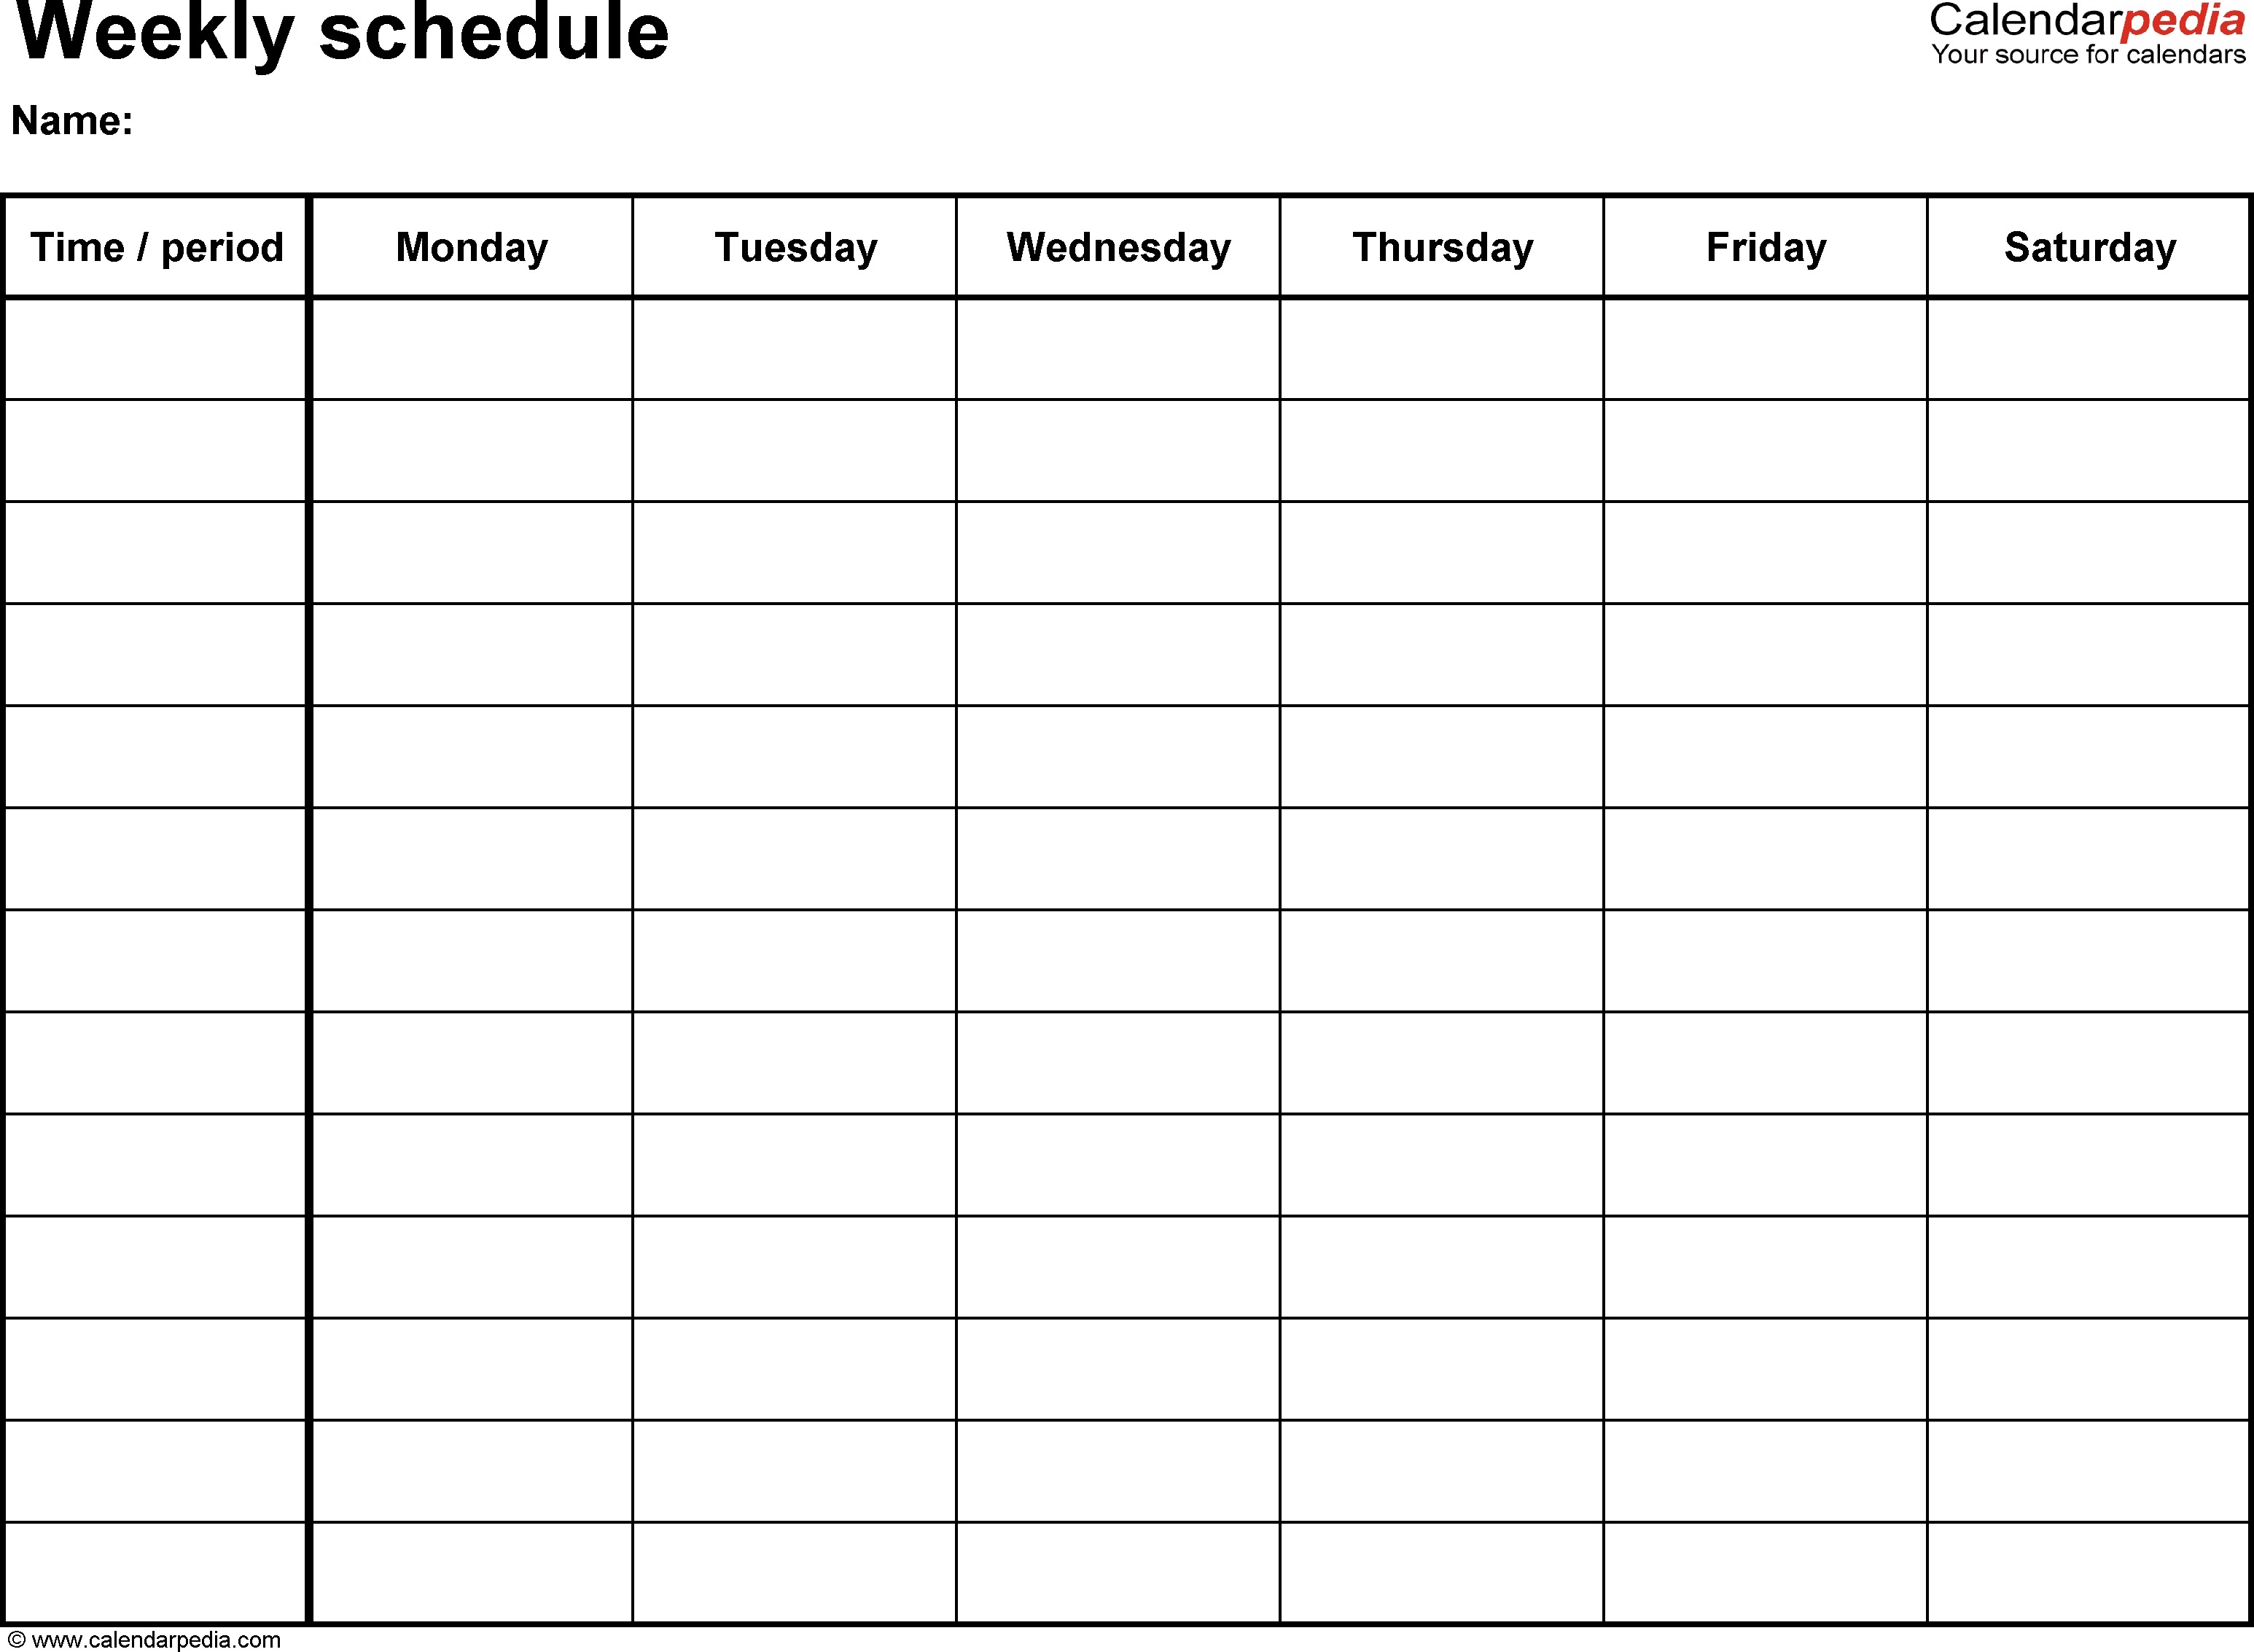 Weekly Schedule Monday Through Friday | Example Calendar throughout Calendar Template Monday Through Friday